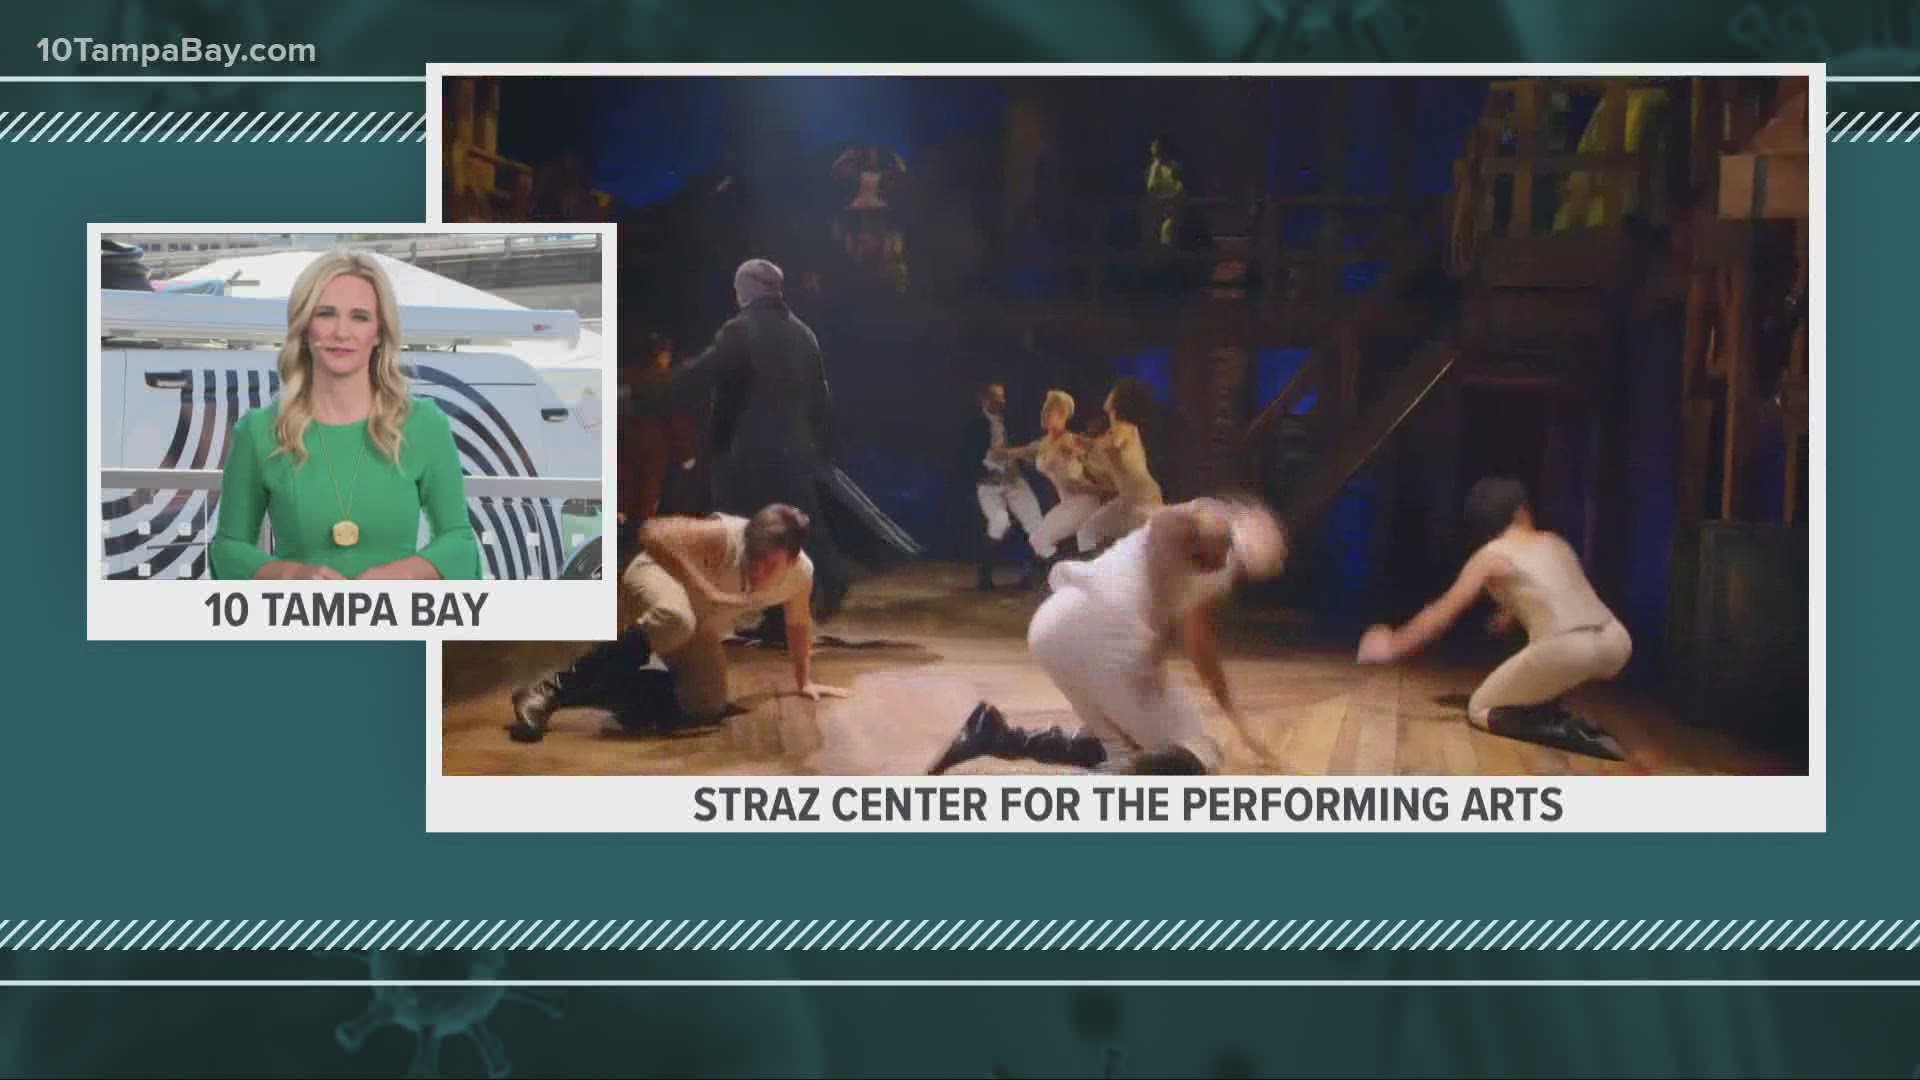 The shows scheduled for June 1-27 at the Straz Center for the Performing Arts have been rescheduled over concerns of COVID-19.